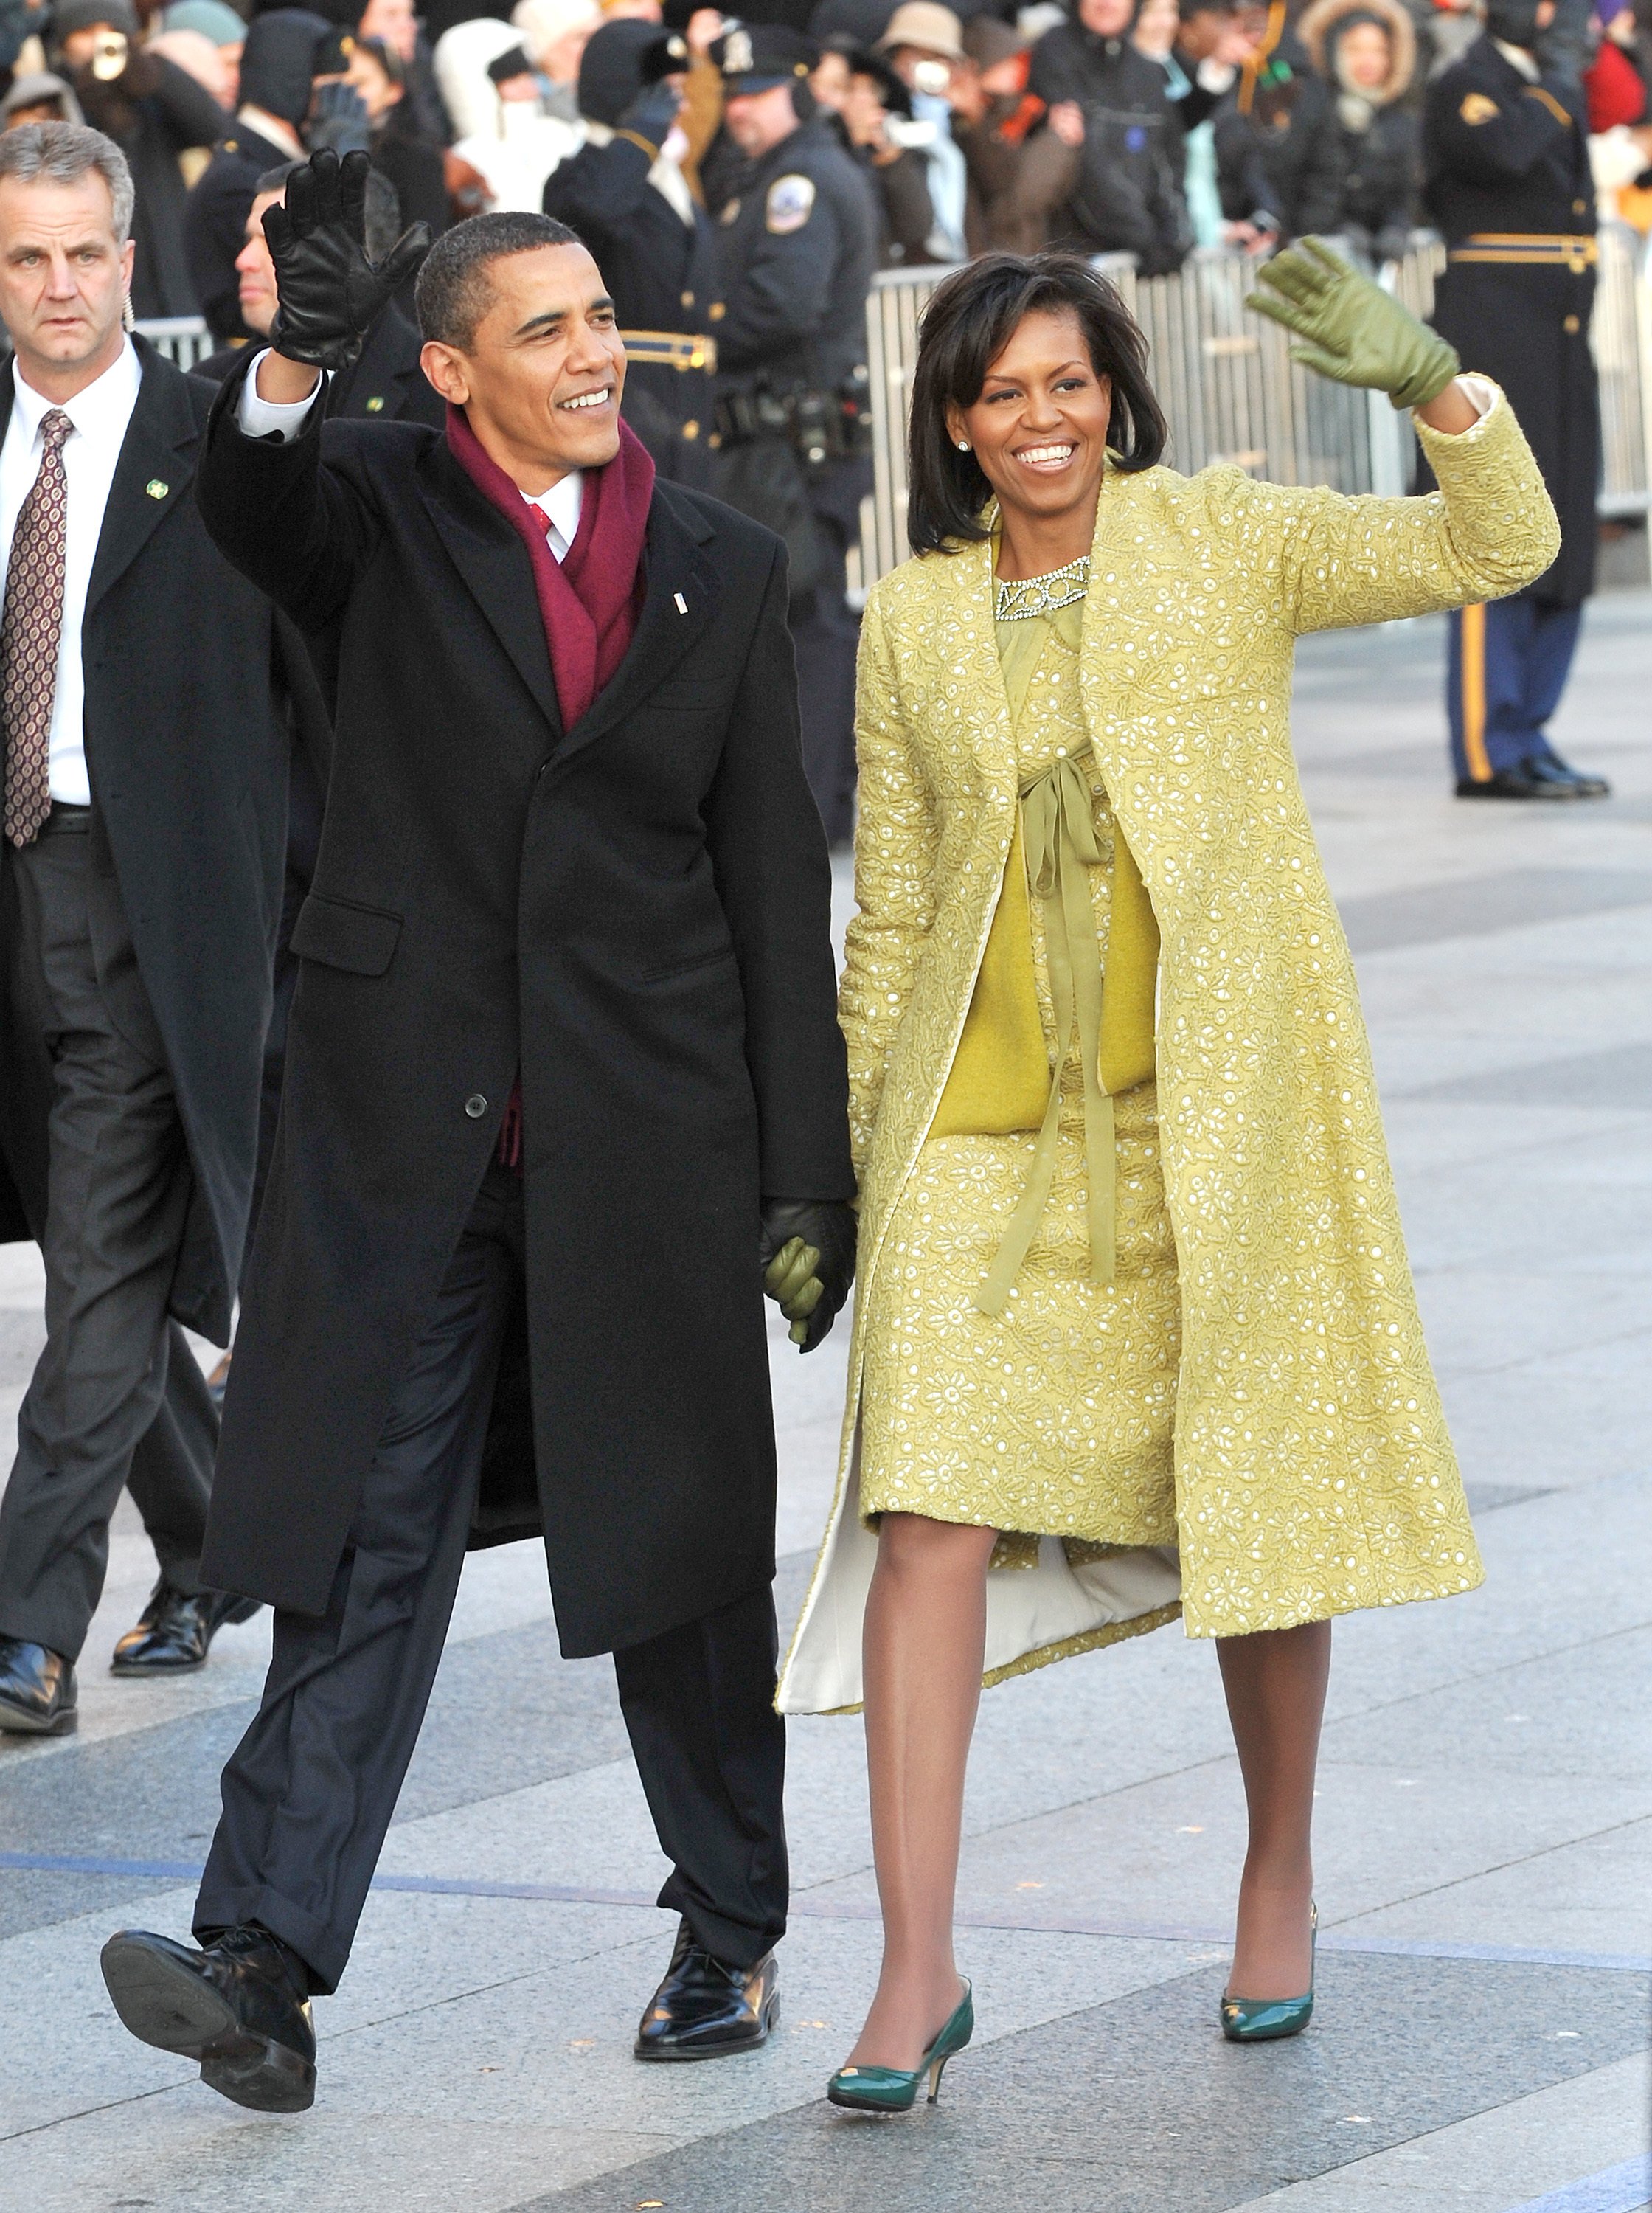 Michelle and Barack Obama partaking in the Inaugural Parade in Washington DC in January 2009. | Photo: Getty Images.